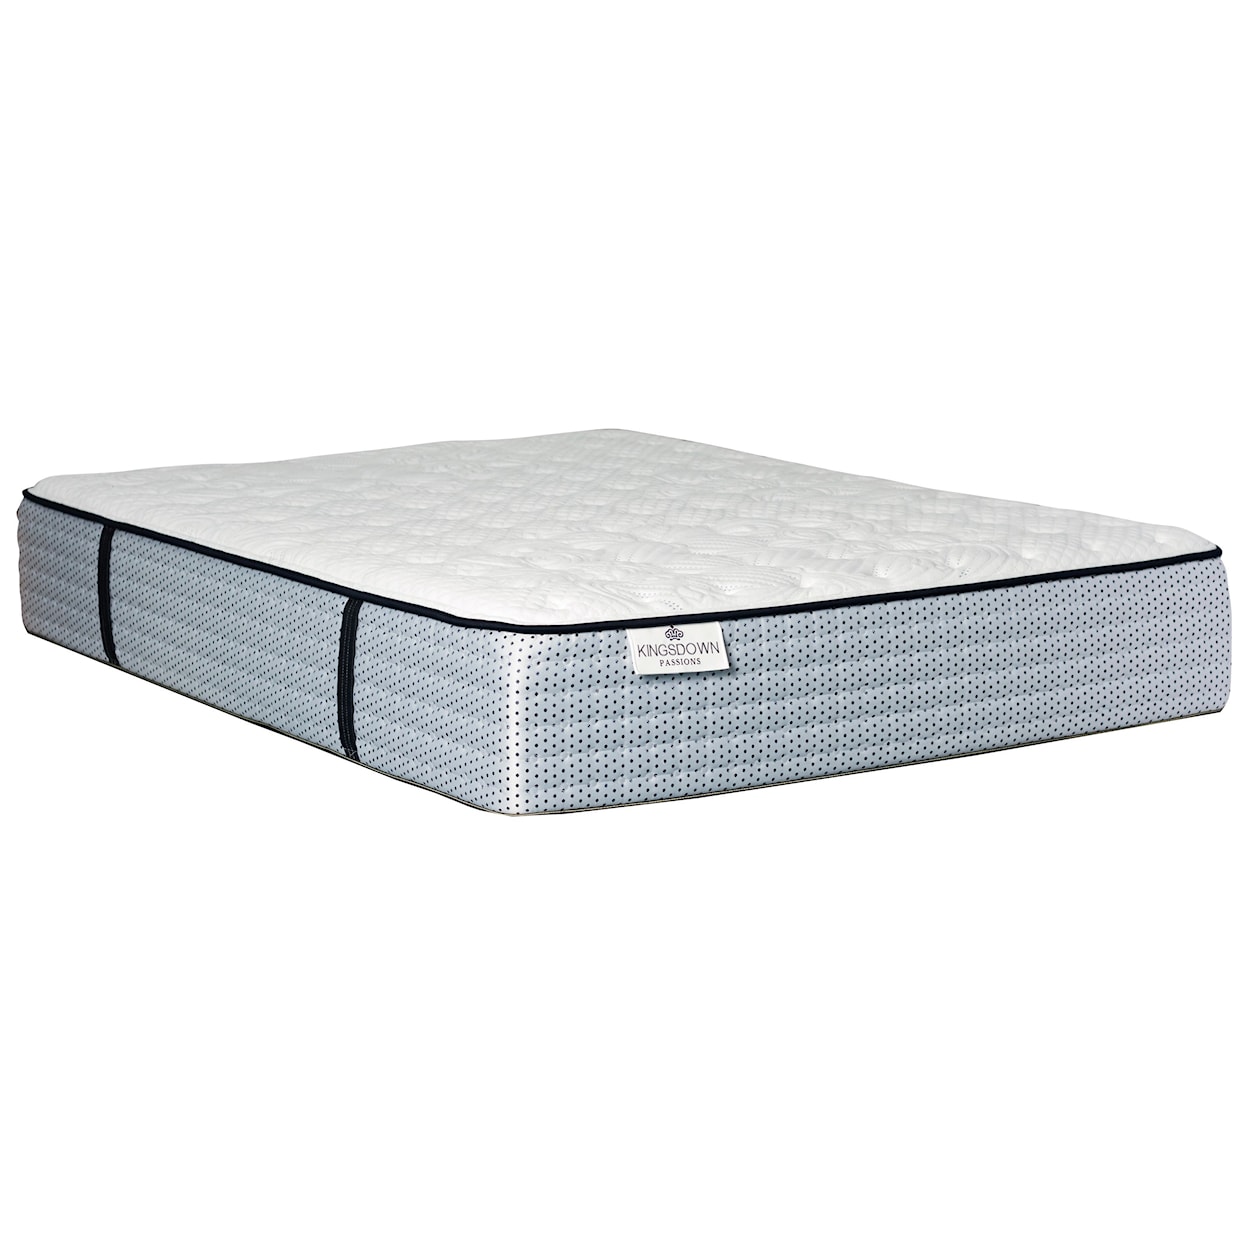 Kingsdown Passions Le Claire TT Twin Pocketed Coil Mattress